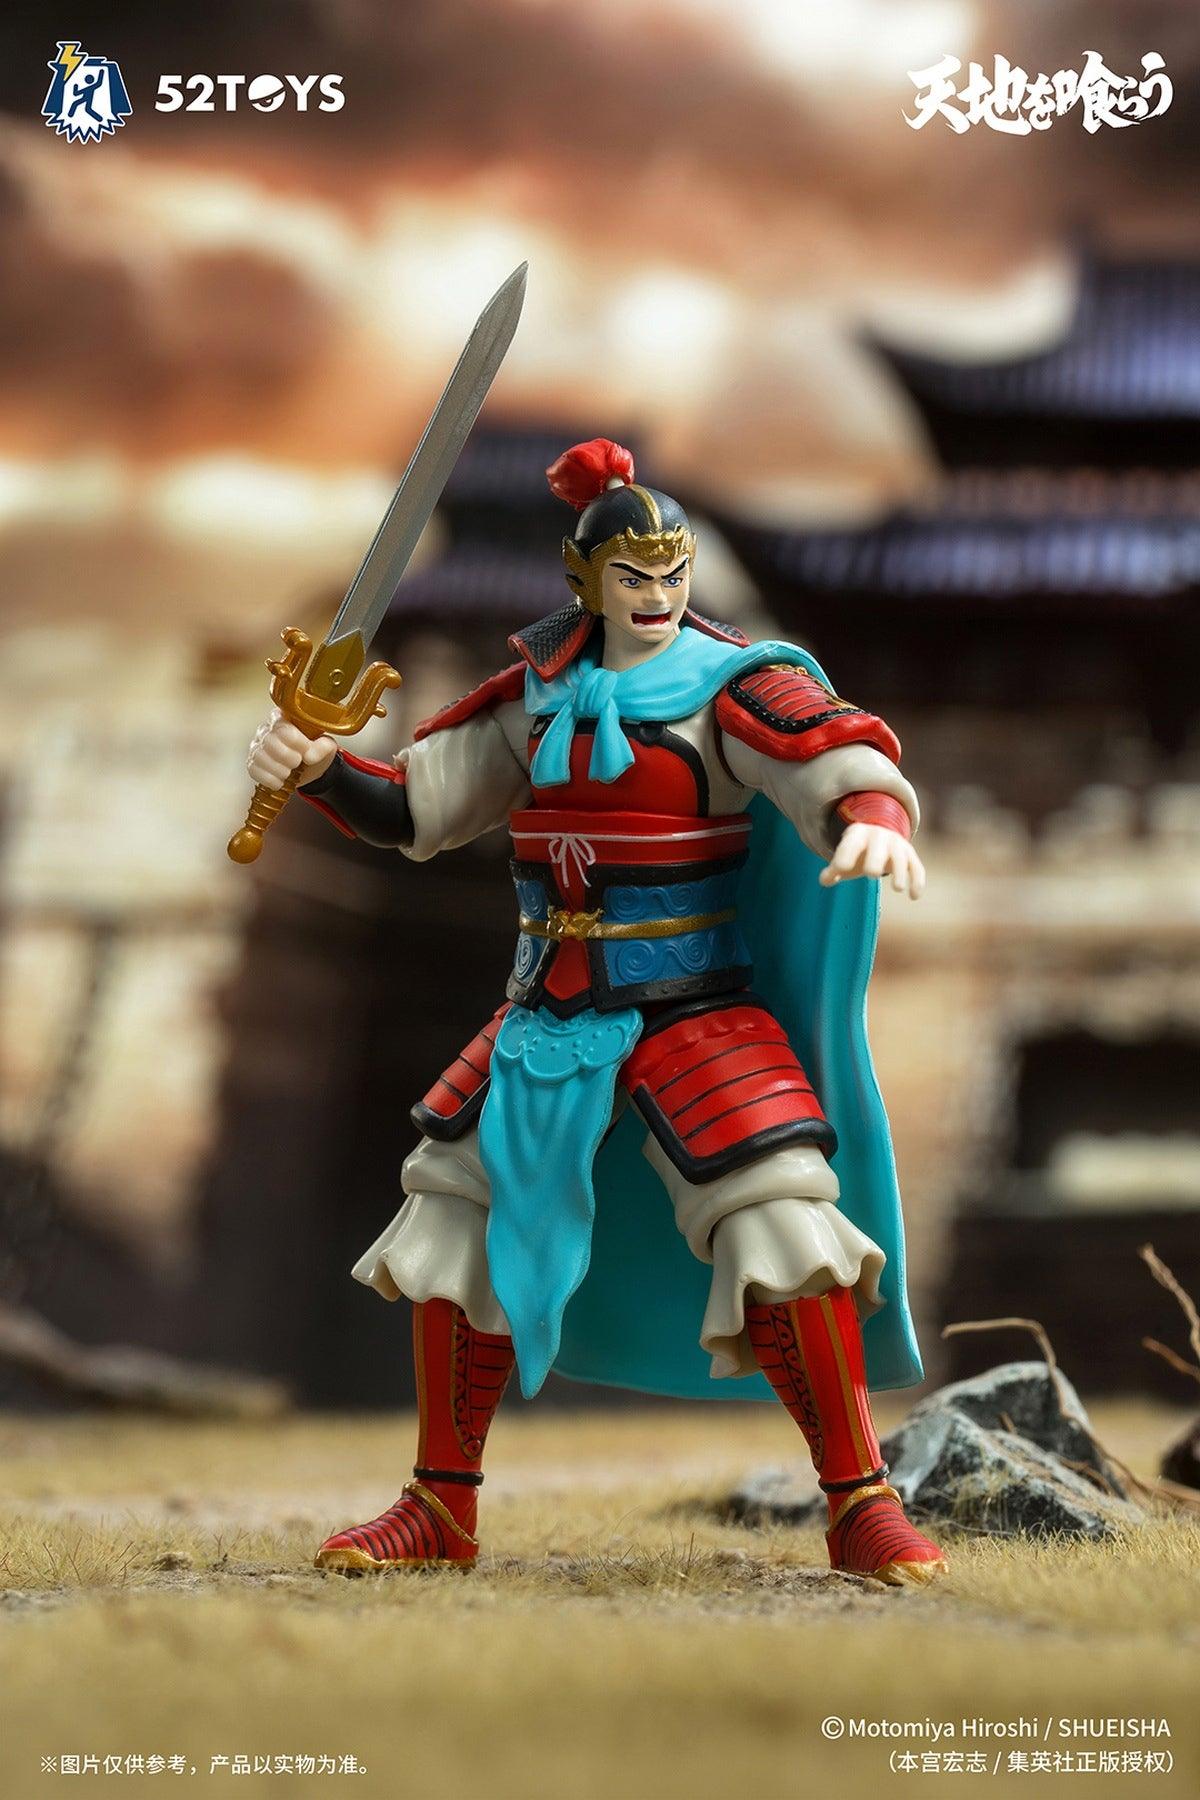 52Toys - 1:18 Liu Bei (Dynasty Wars) Action Figure